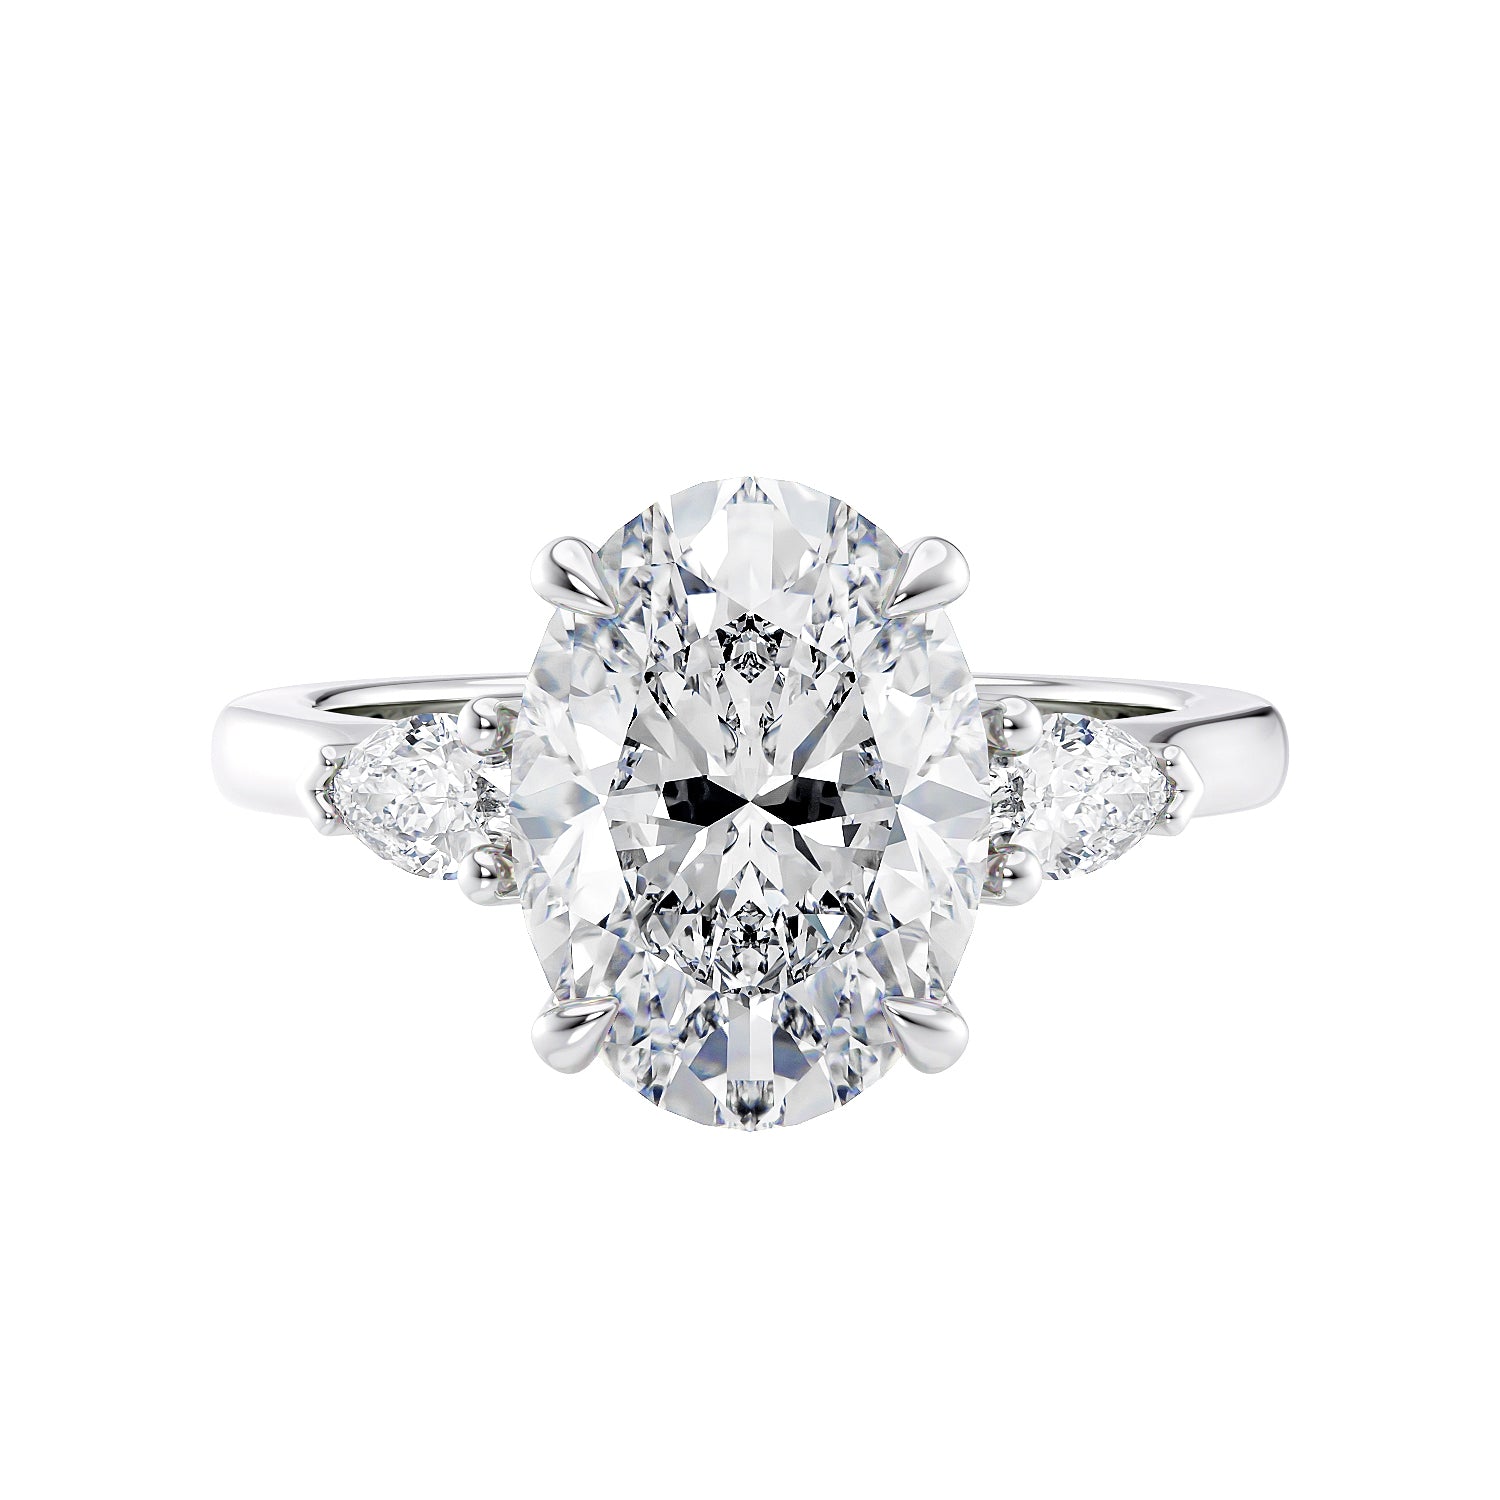 3 stone oval and pear diamond engagement ring white gold front view.